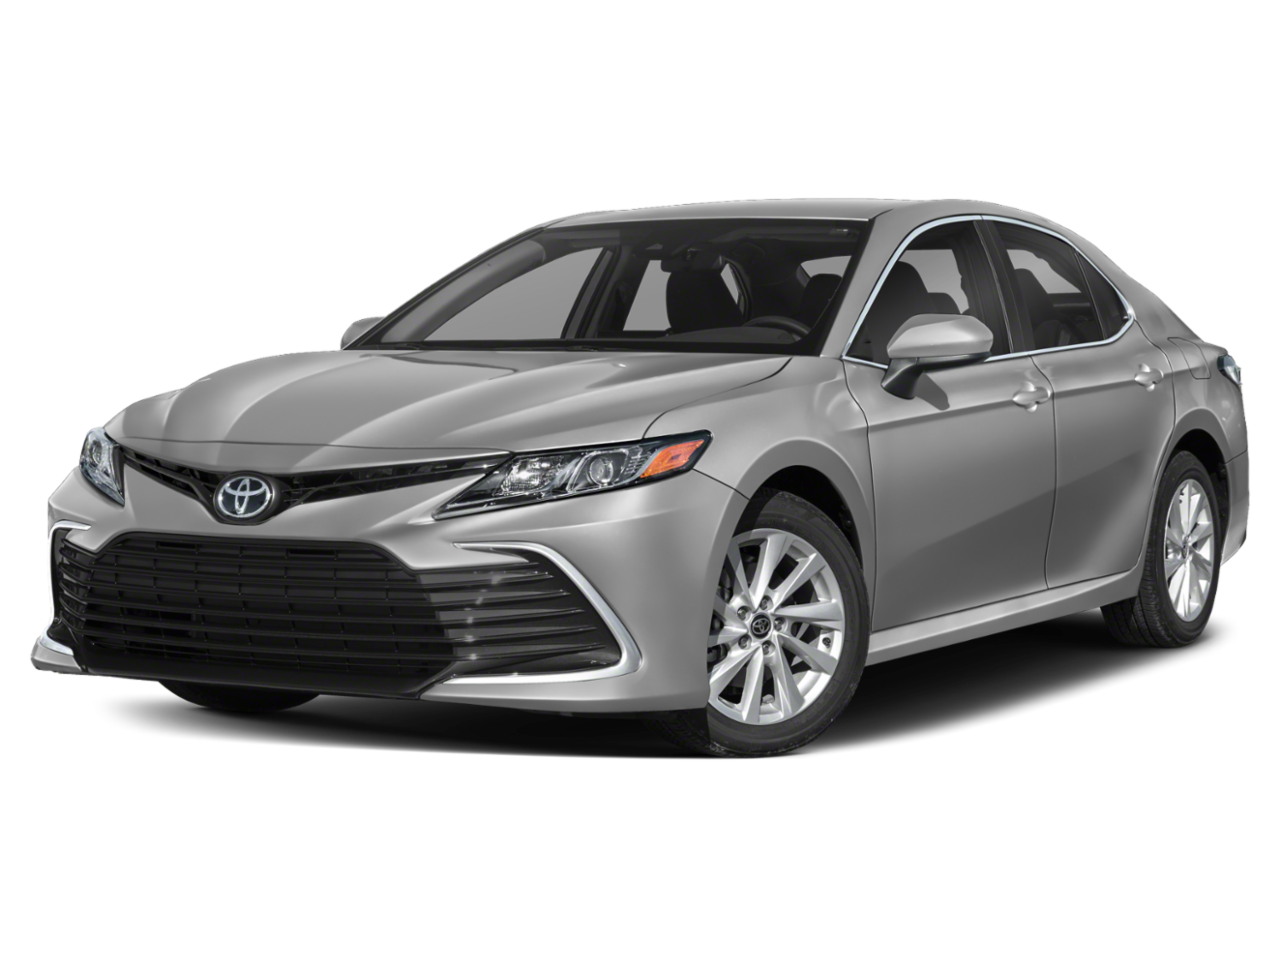 Toyota Camry Transparent Images